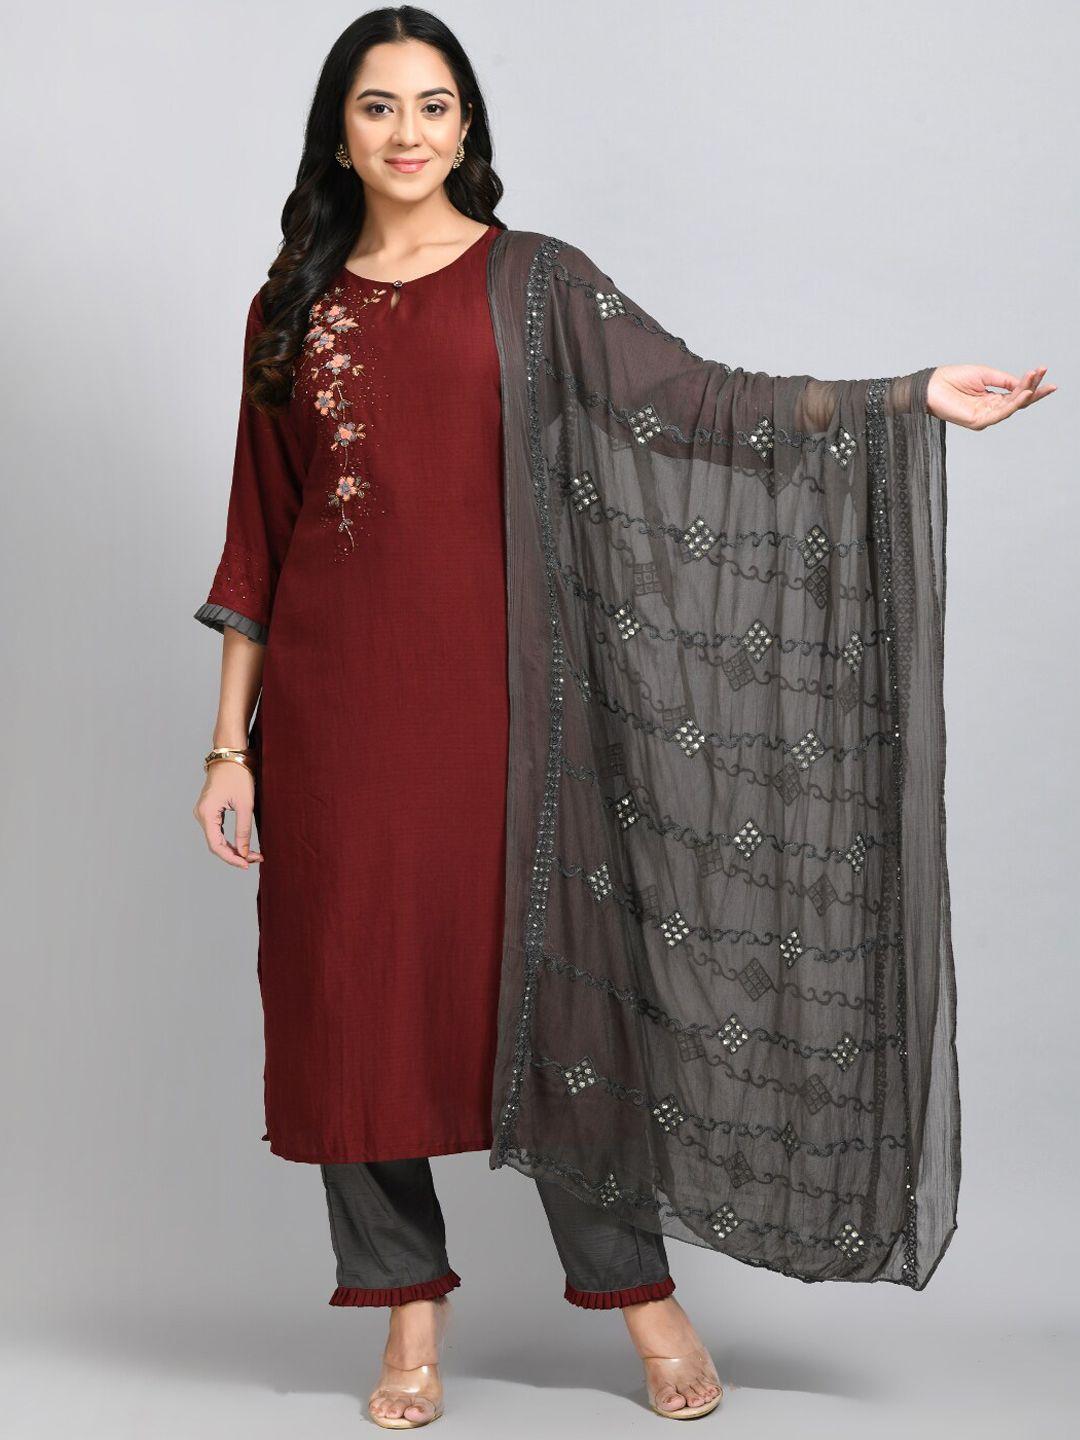 desinoor.com floral embroidered beads and stones kurta with trousers & with dupatta